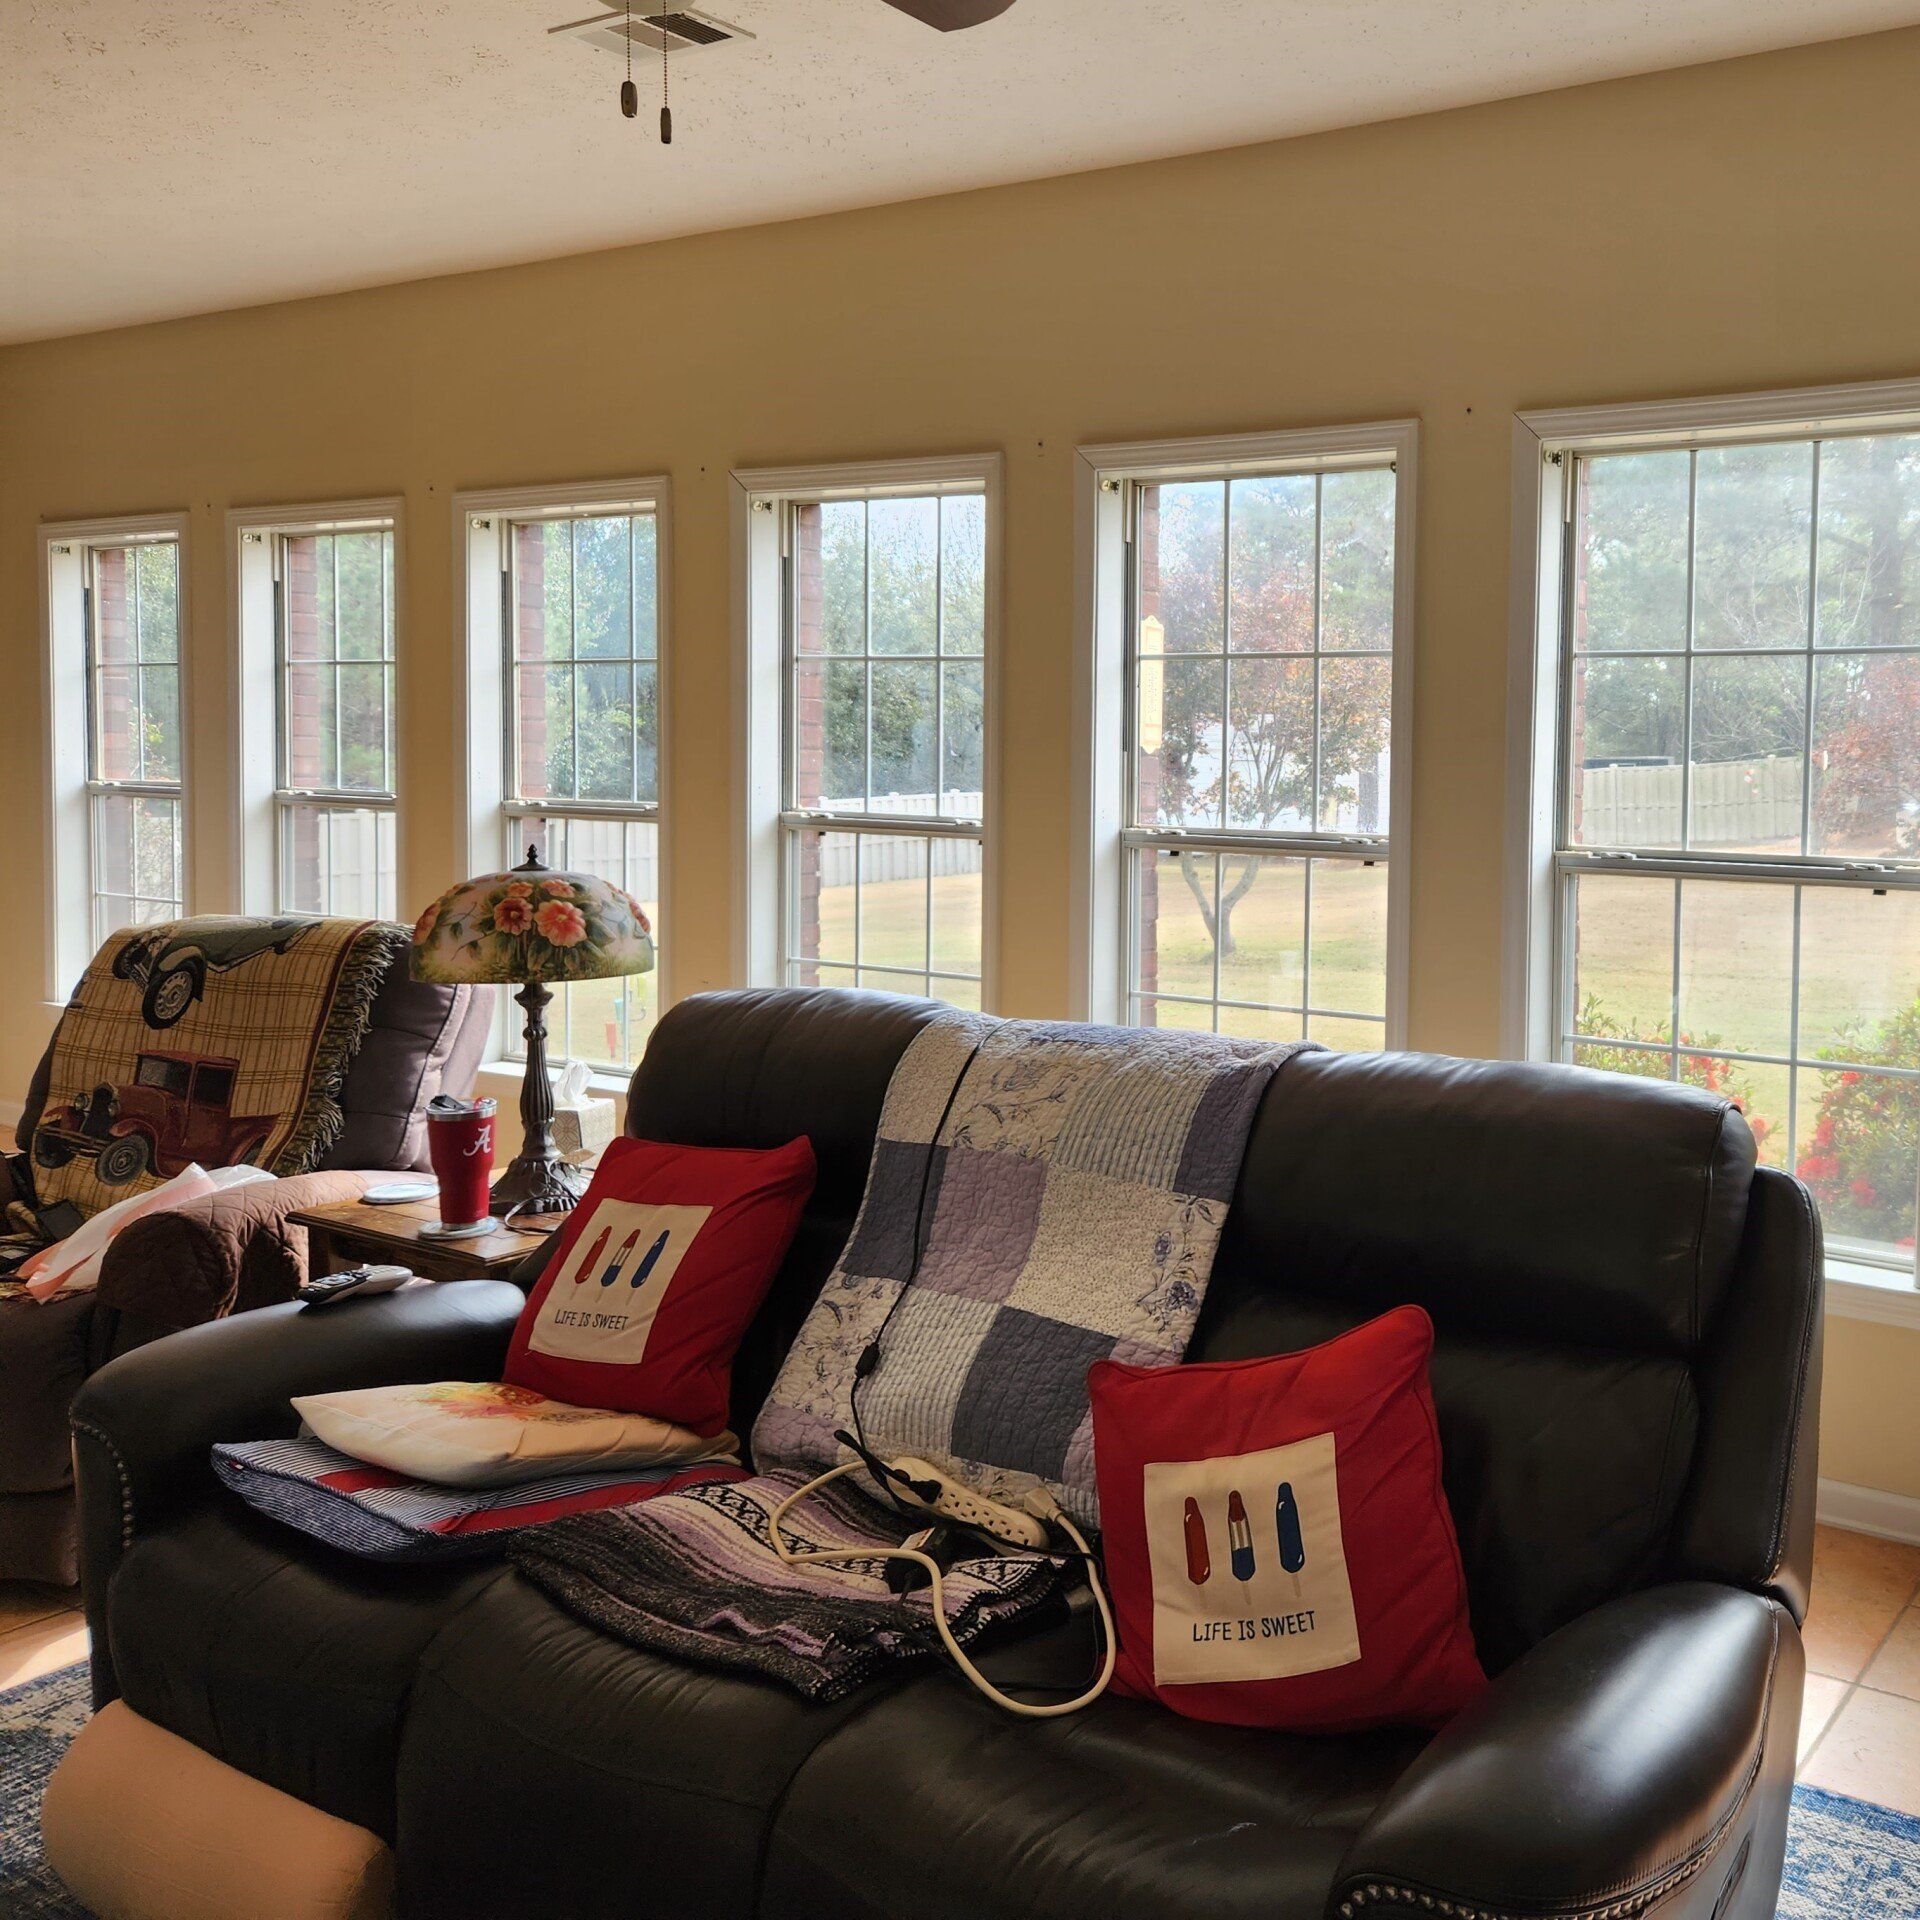 home window tinting - UV Sunlight filtered by SPF home window tint treatment in AL